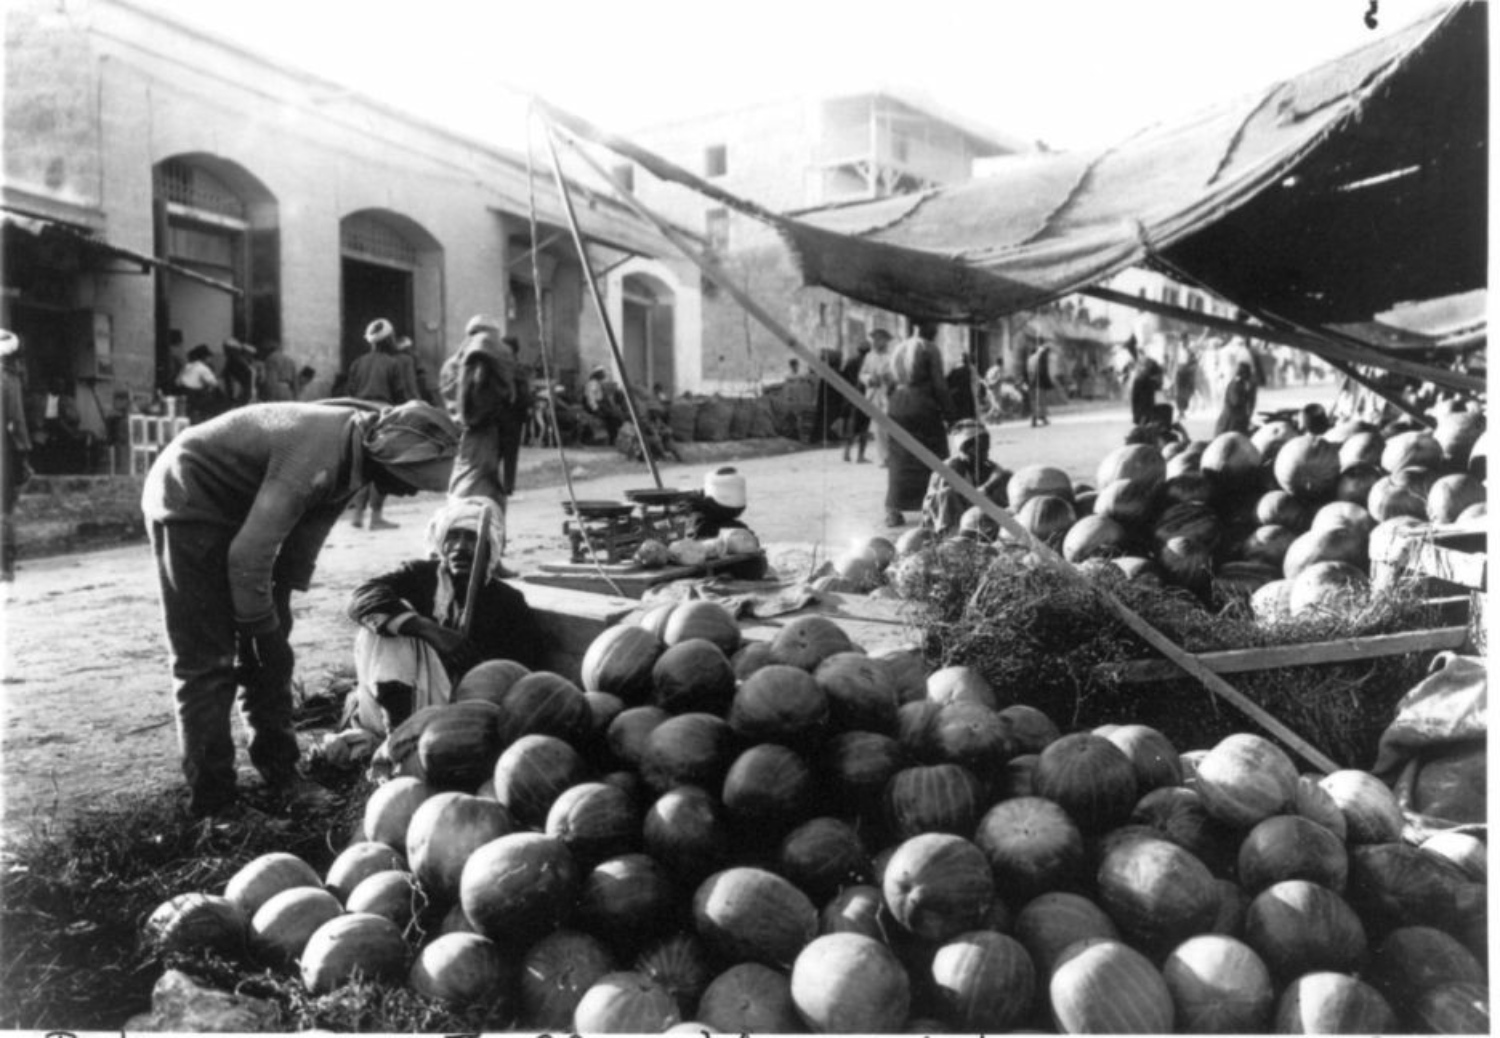 Palestinian farmers sell their watermelons at a Jaffa market in 1940 (Social media/Palestine agricultural memory Facebook page)